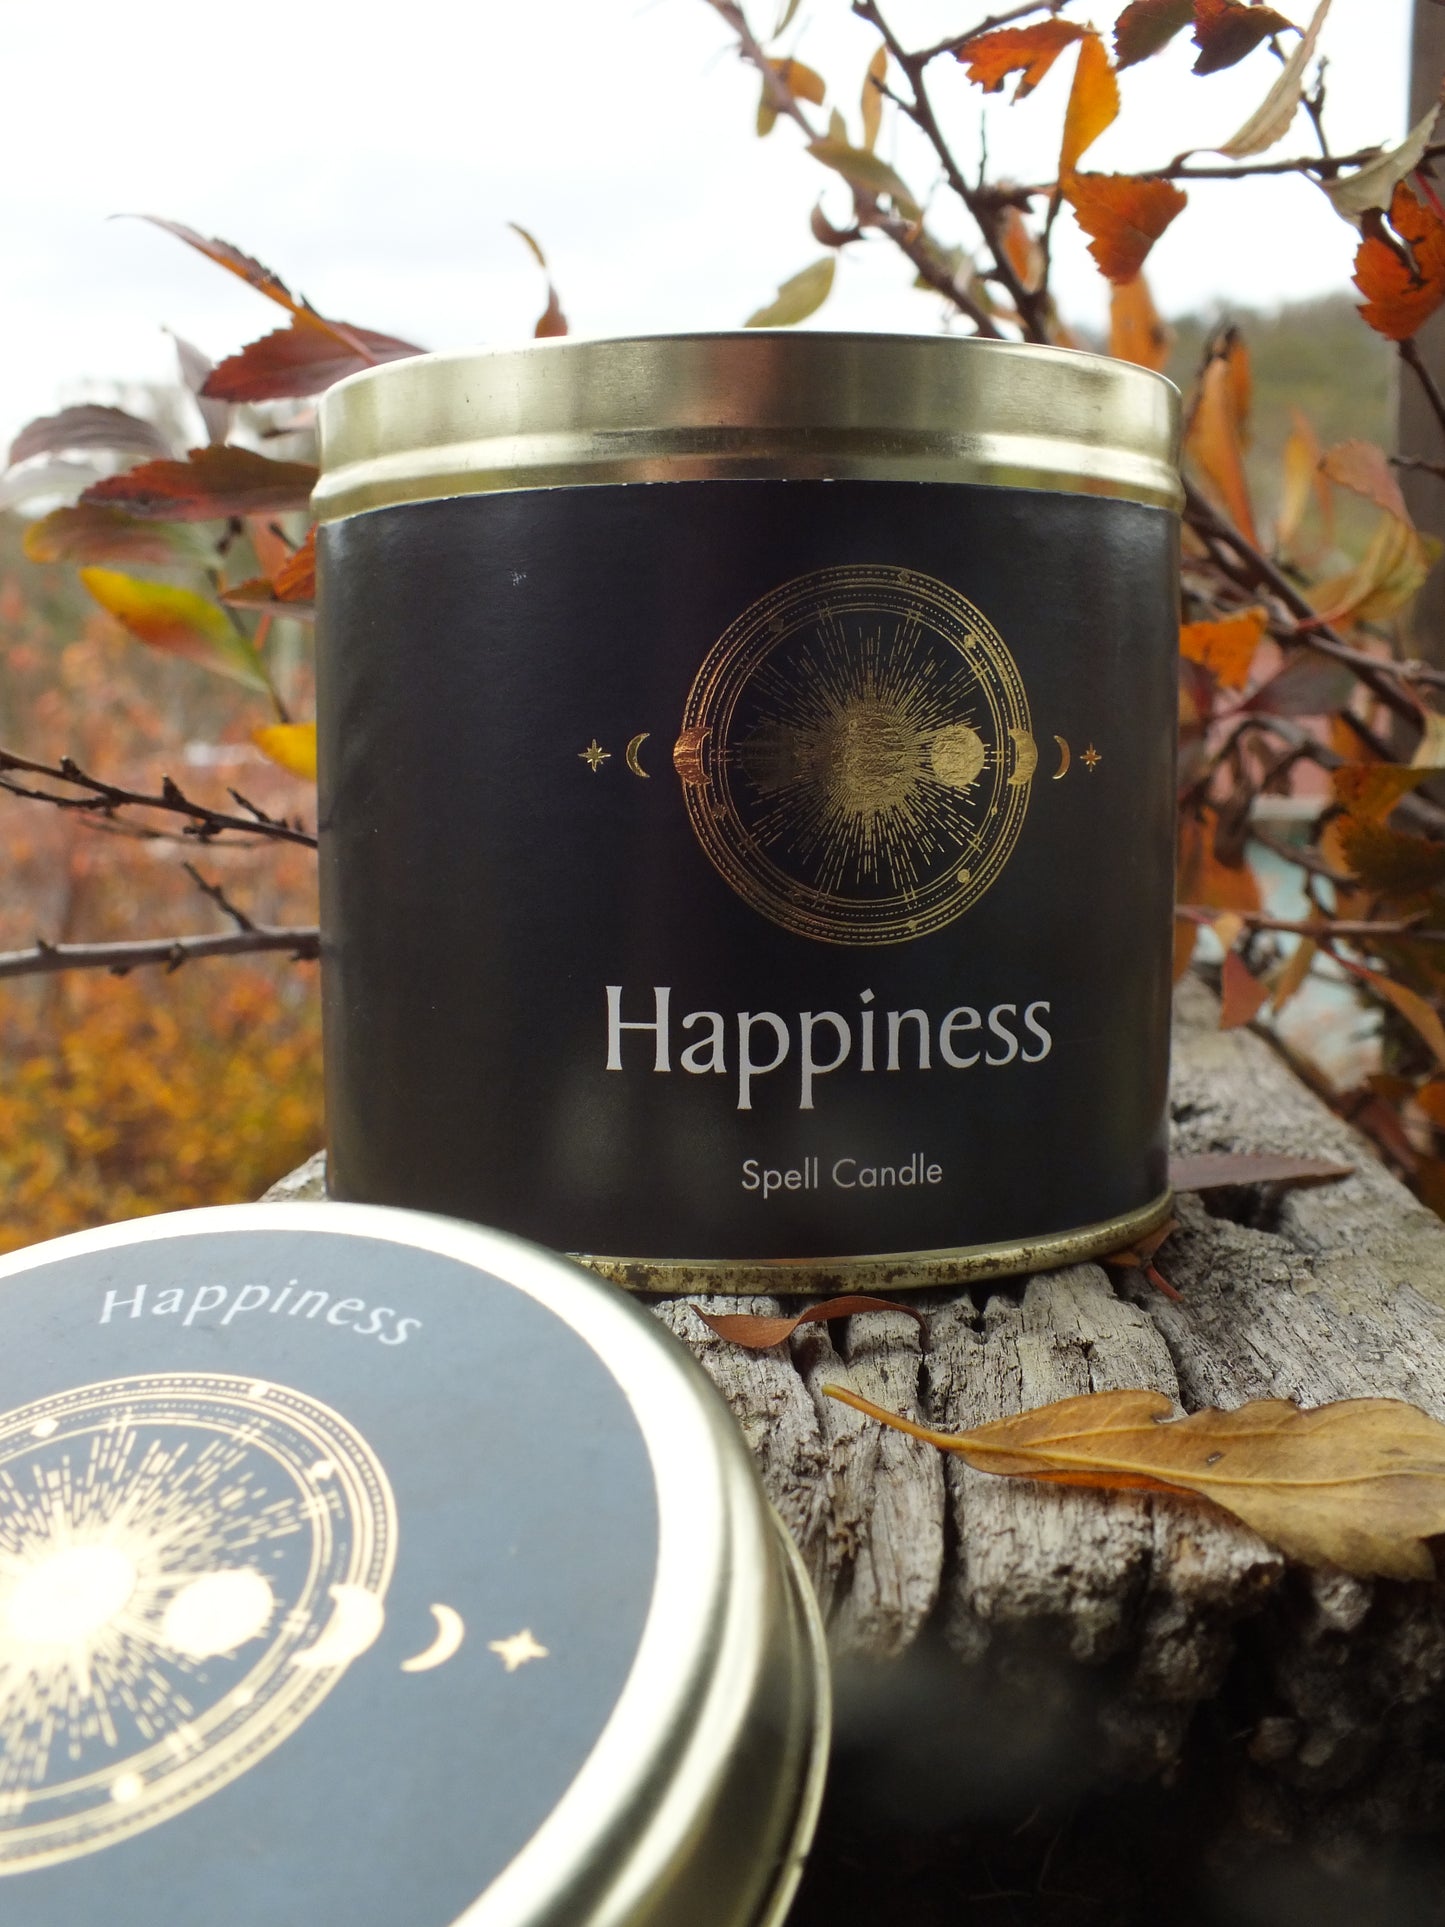 Magic Spell Candle - Happiness